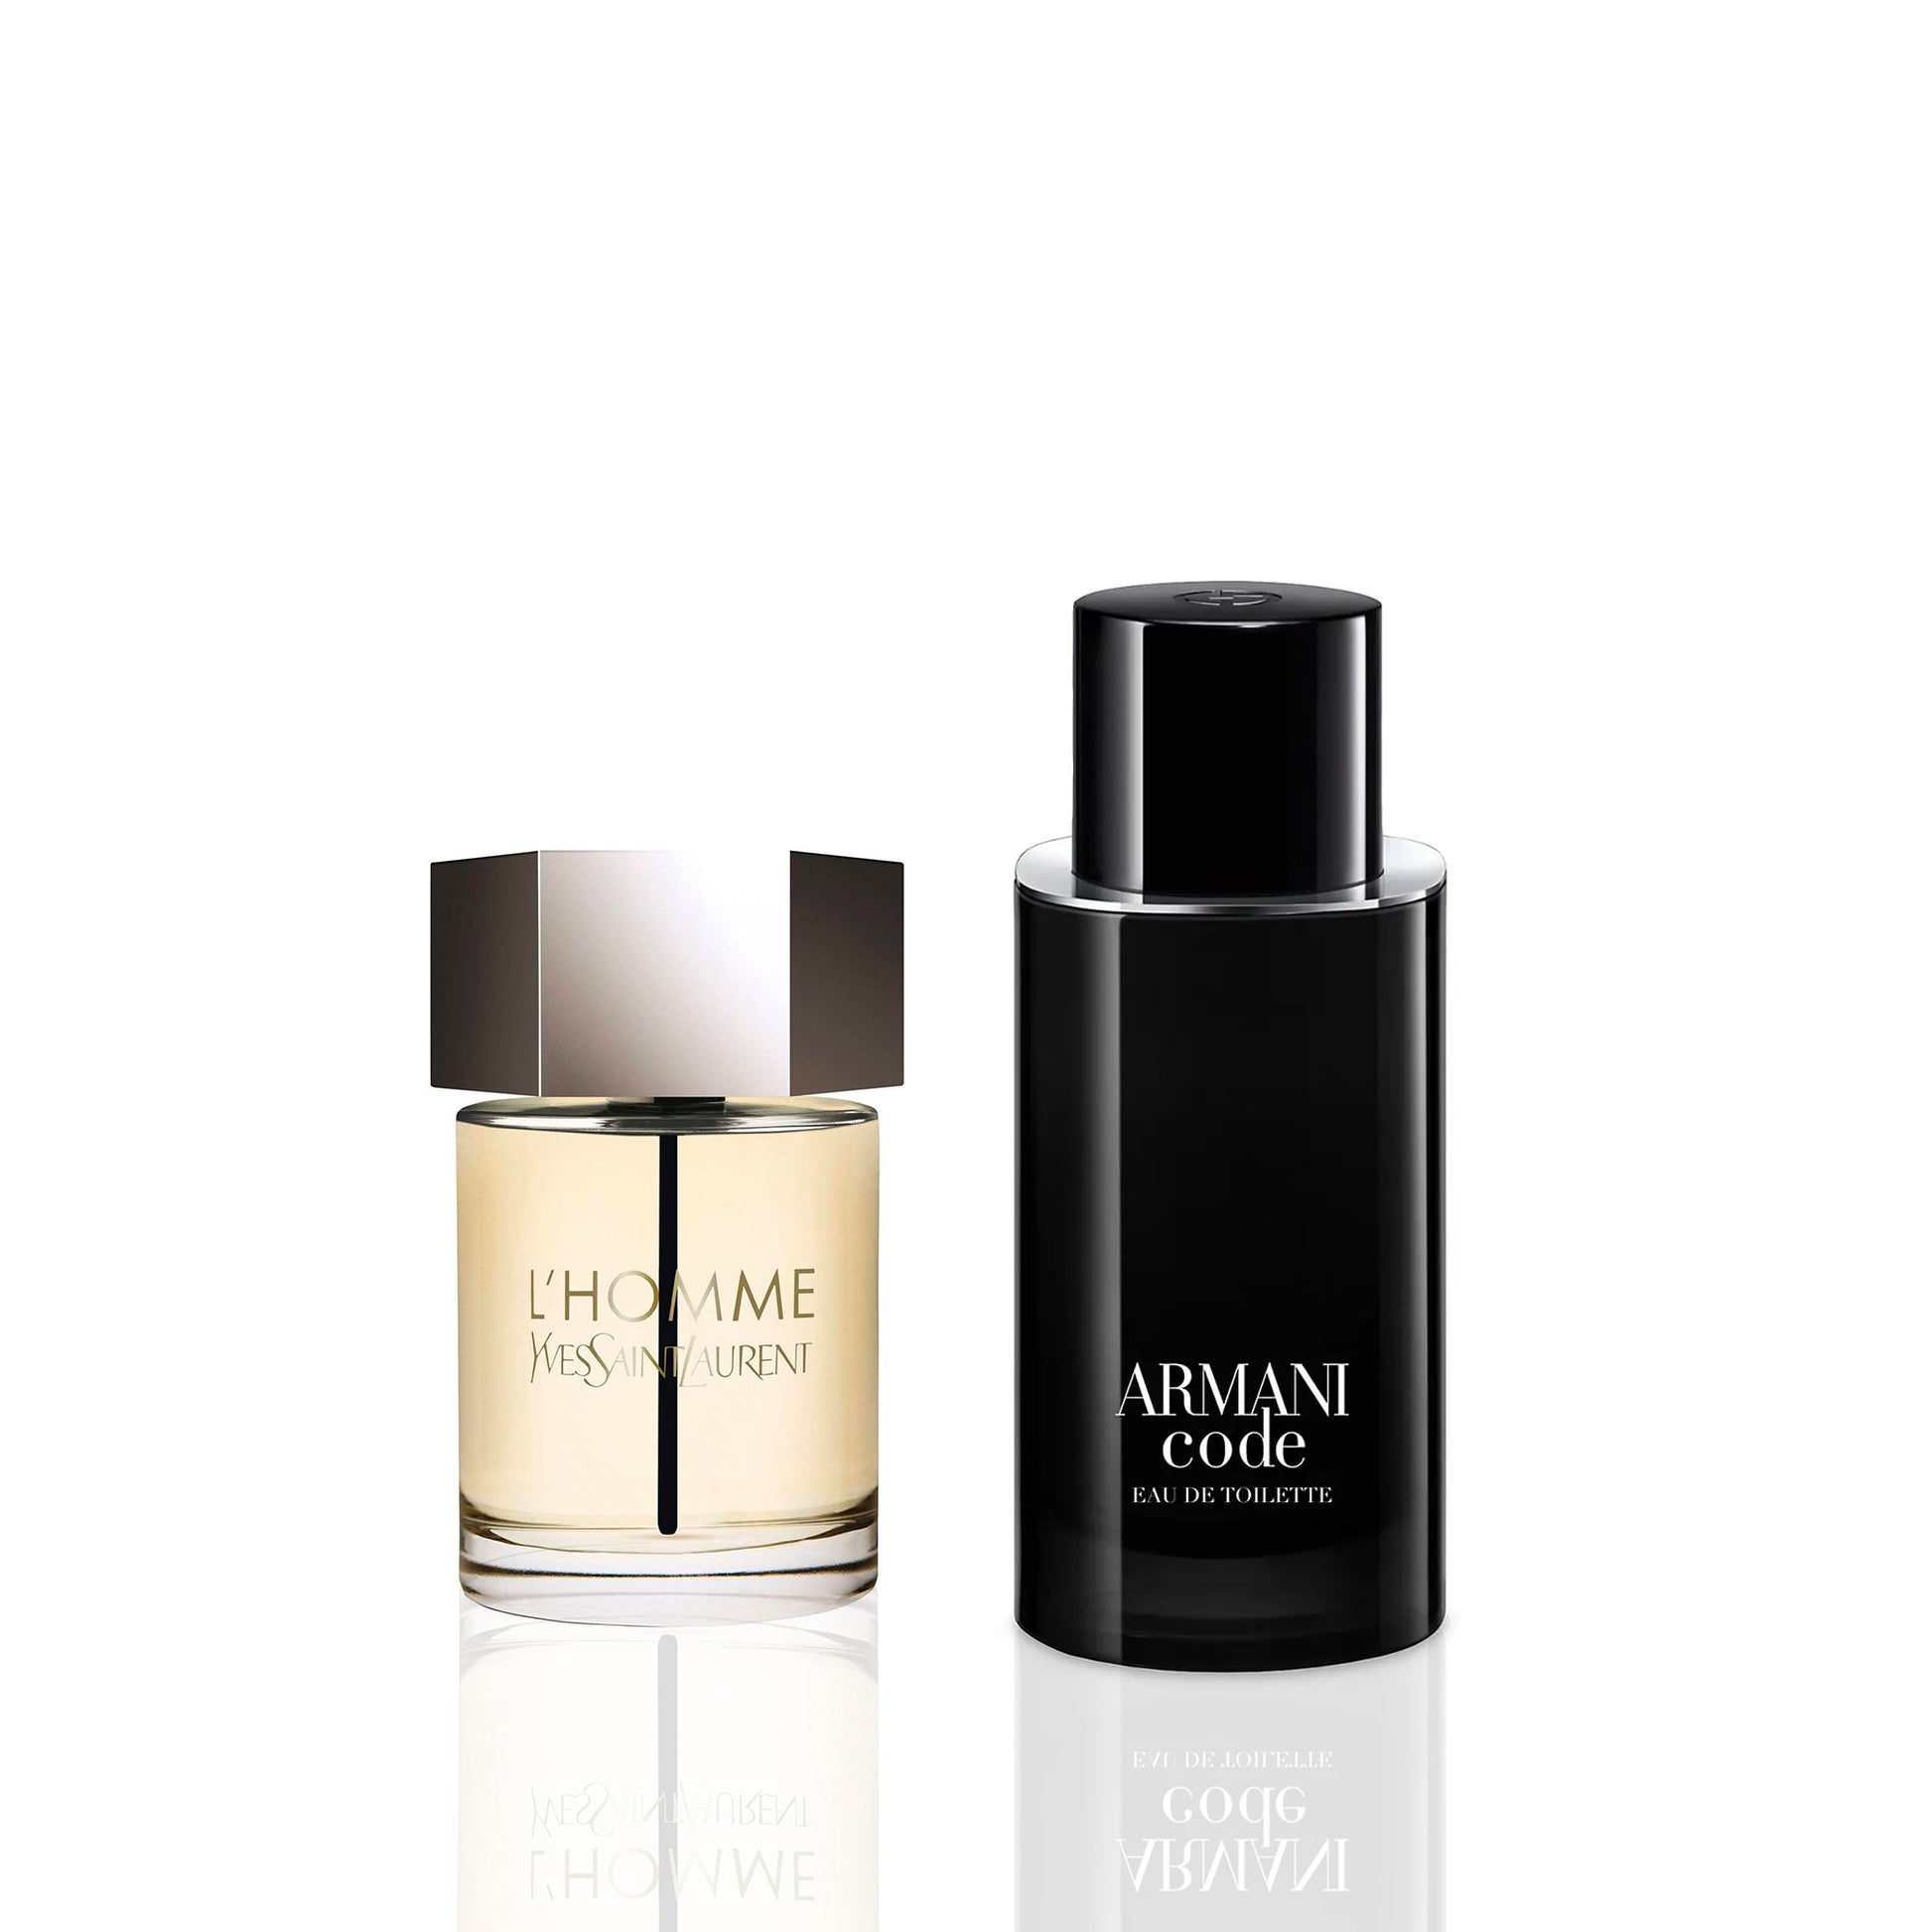 Bundle Deal For Men: L'Homme by Yves Saint Laurent and Armani Code by Giorgio Armani, Product image 1